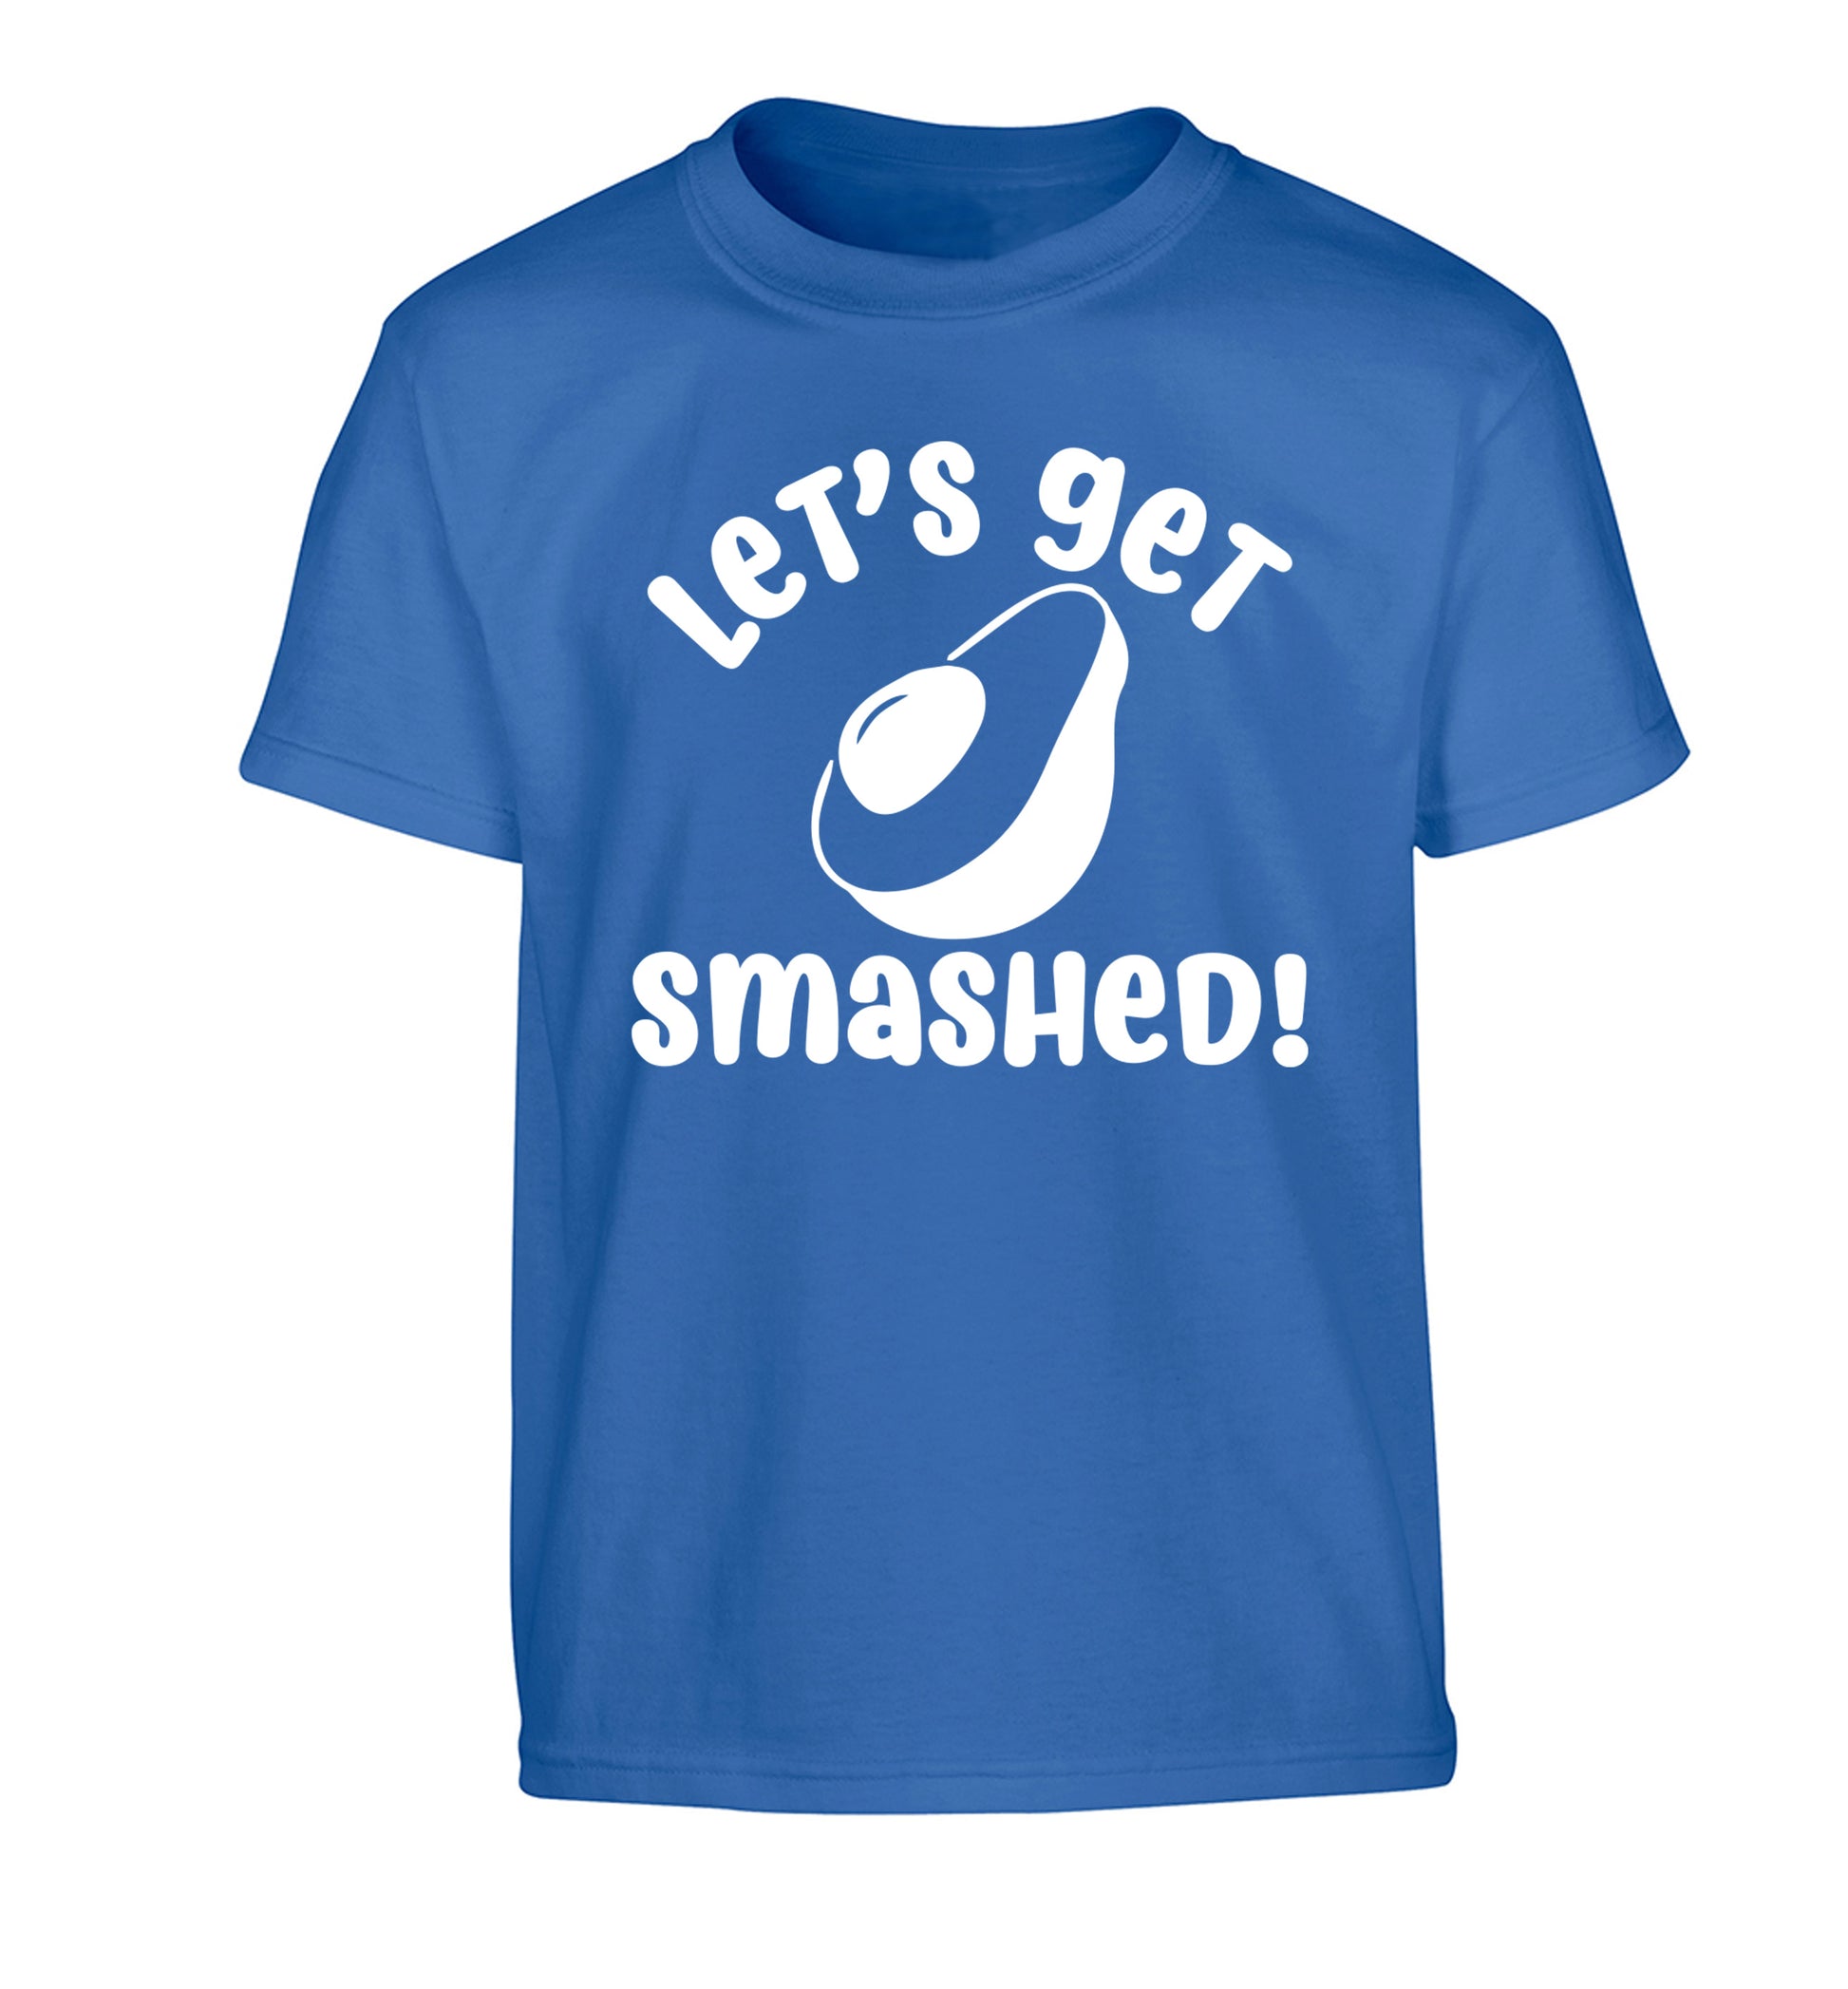 Let's get smashed Children's blue Tshirt 12-14 Years